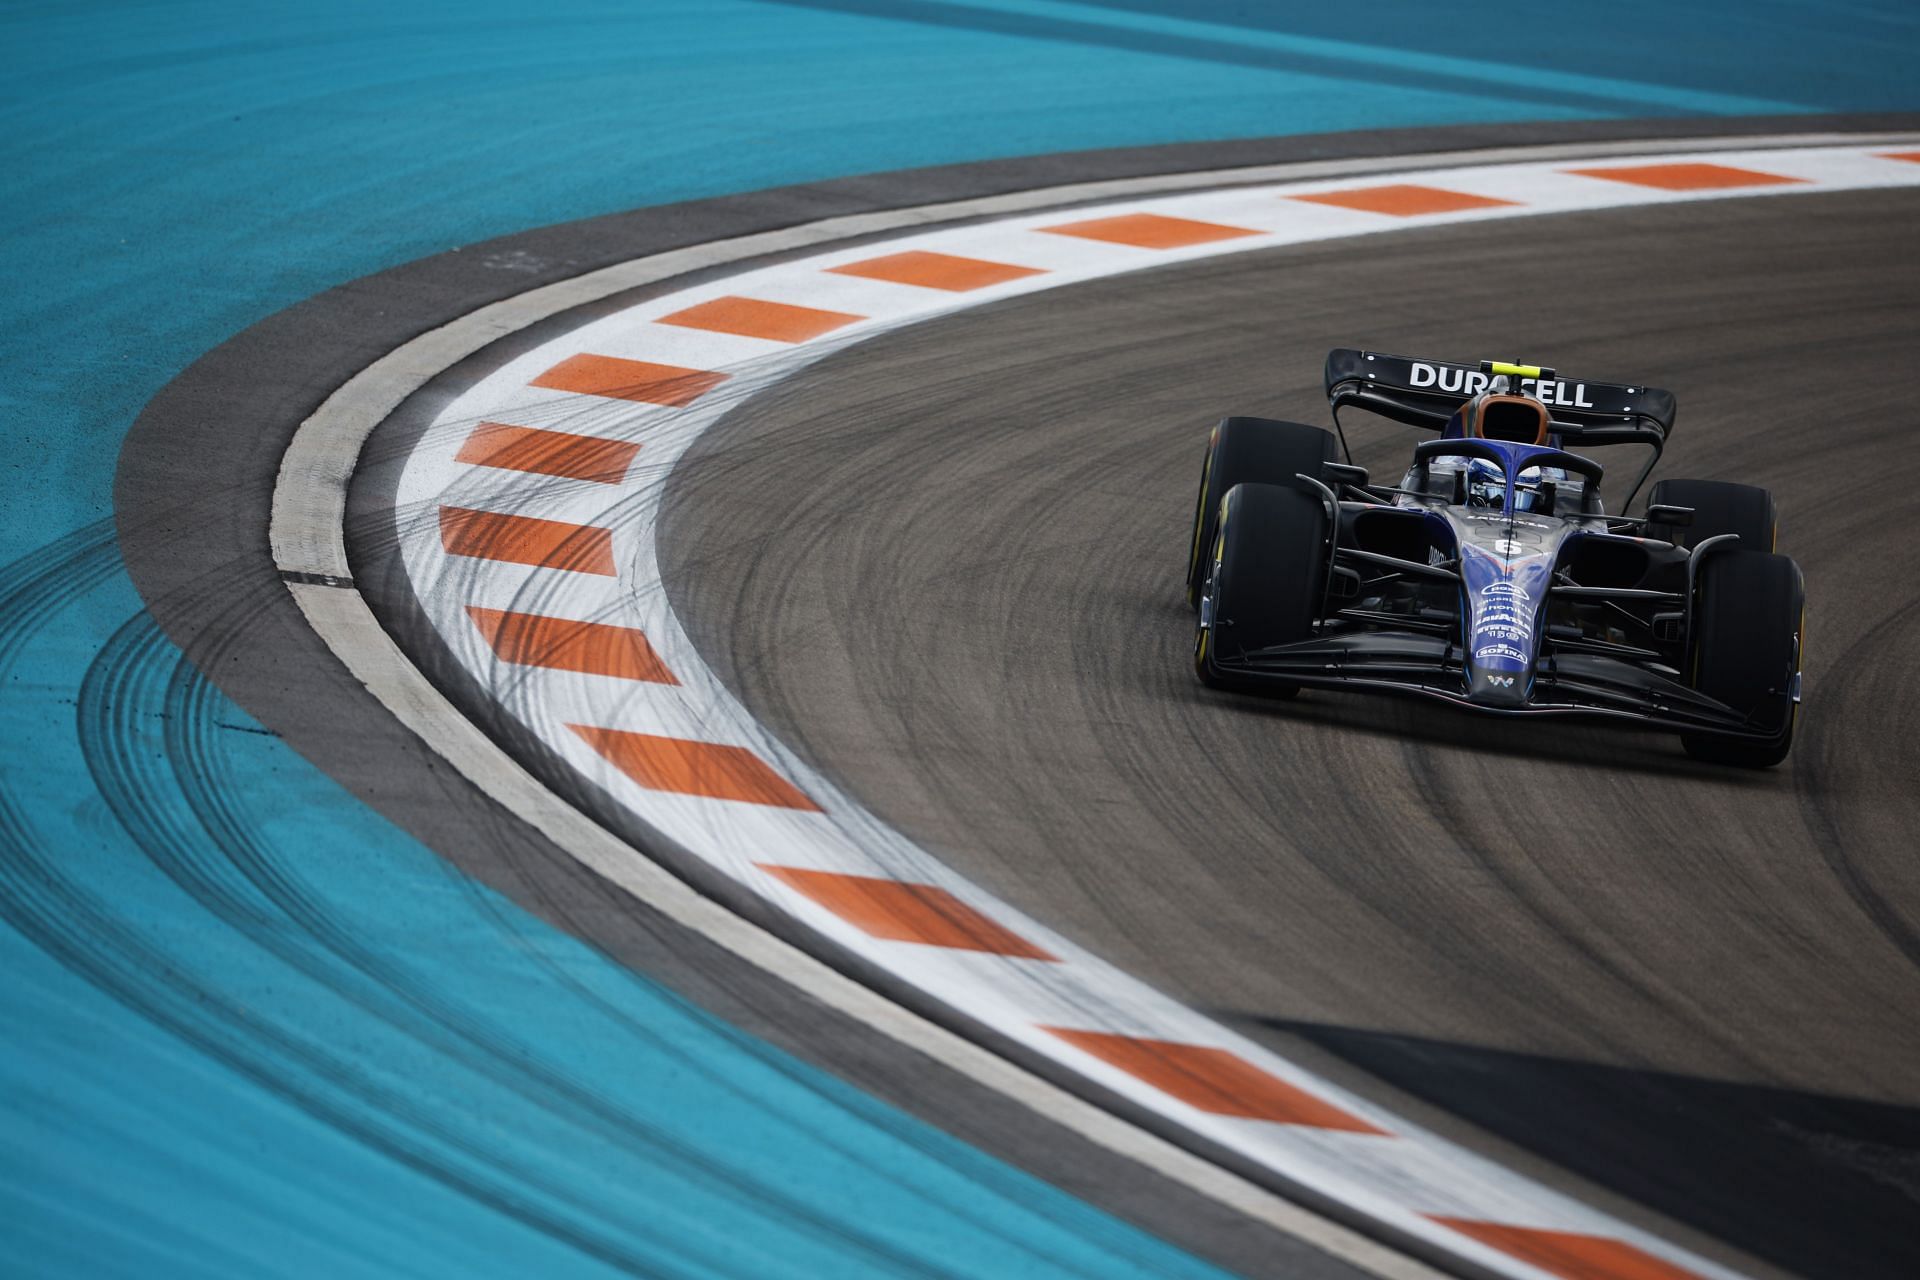 Williams driver Nicholas Latifi in action during the 2022 F1 Miami GP (Photo by Chris Graythen/Getty Images)